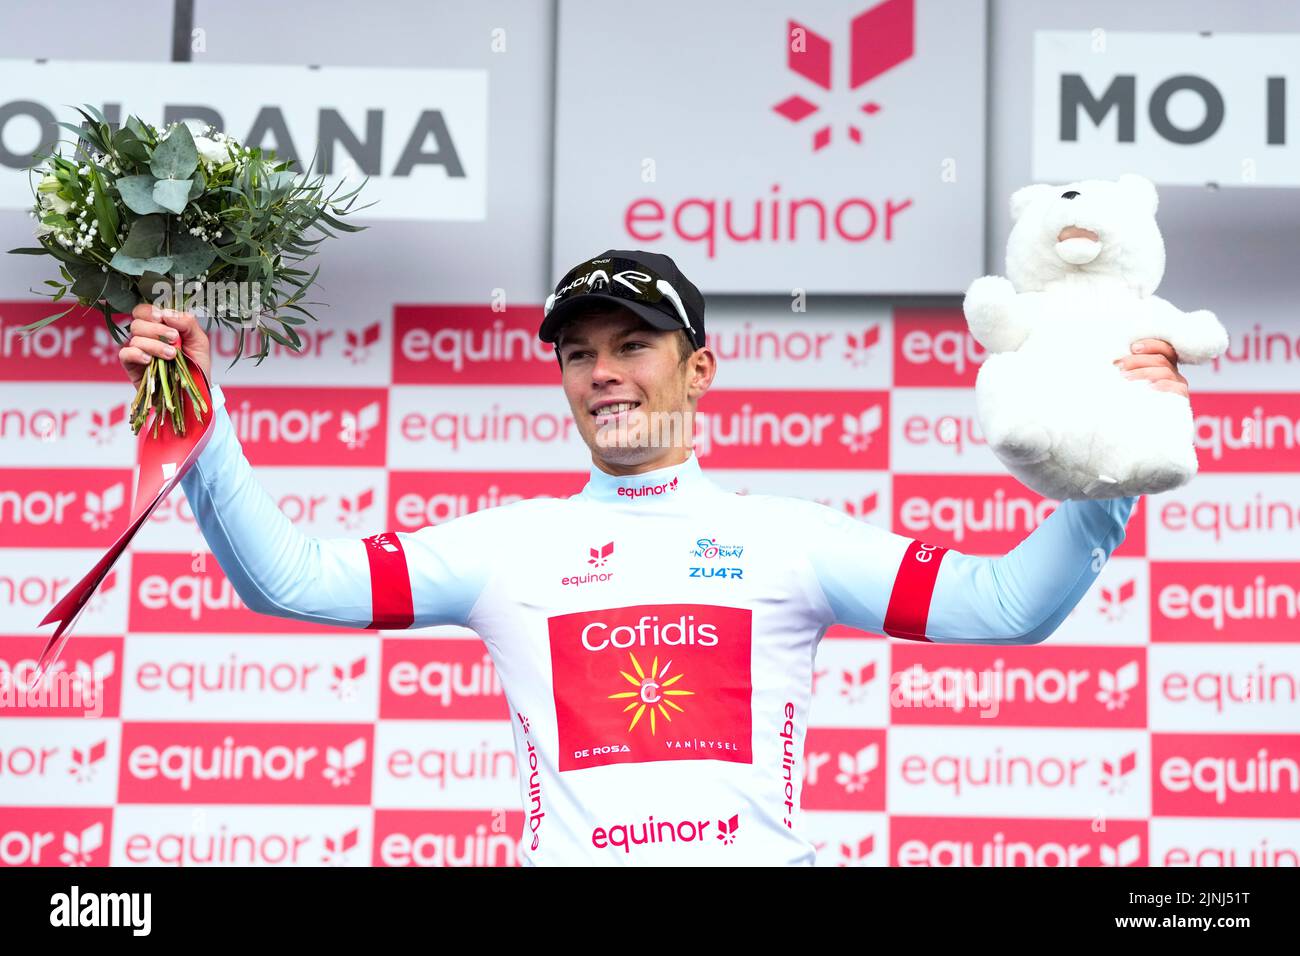 Mo I Rana 20220811.Axel Zingle from Cofidis on the podium after winning the first stage of the Arctic Race of Norway in Mo i Rana on Thursday. Photo: Beate Oma Dahle / NTB Stock Photo